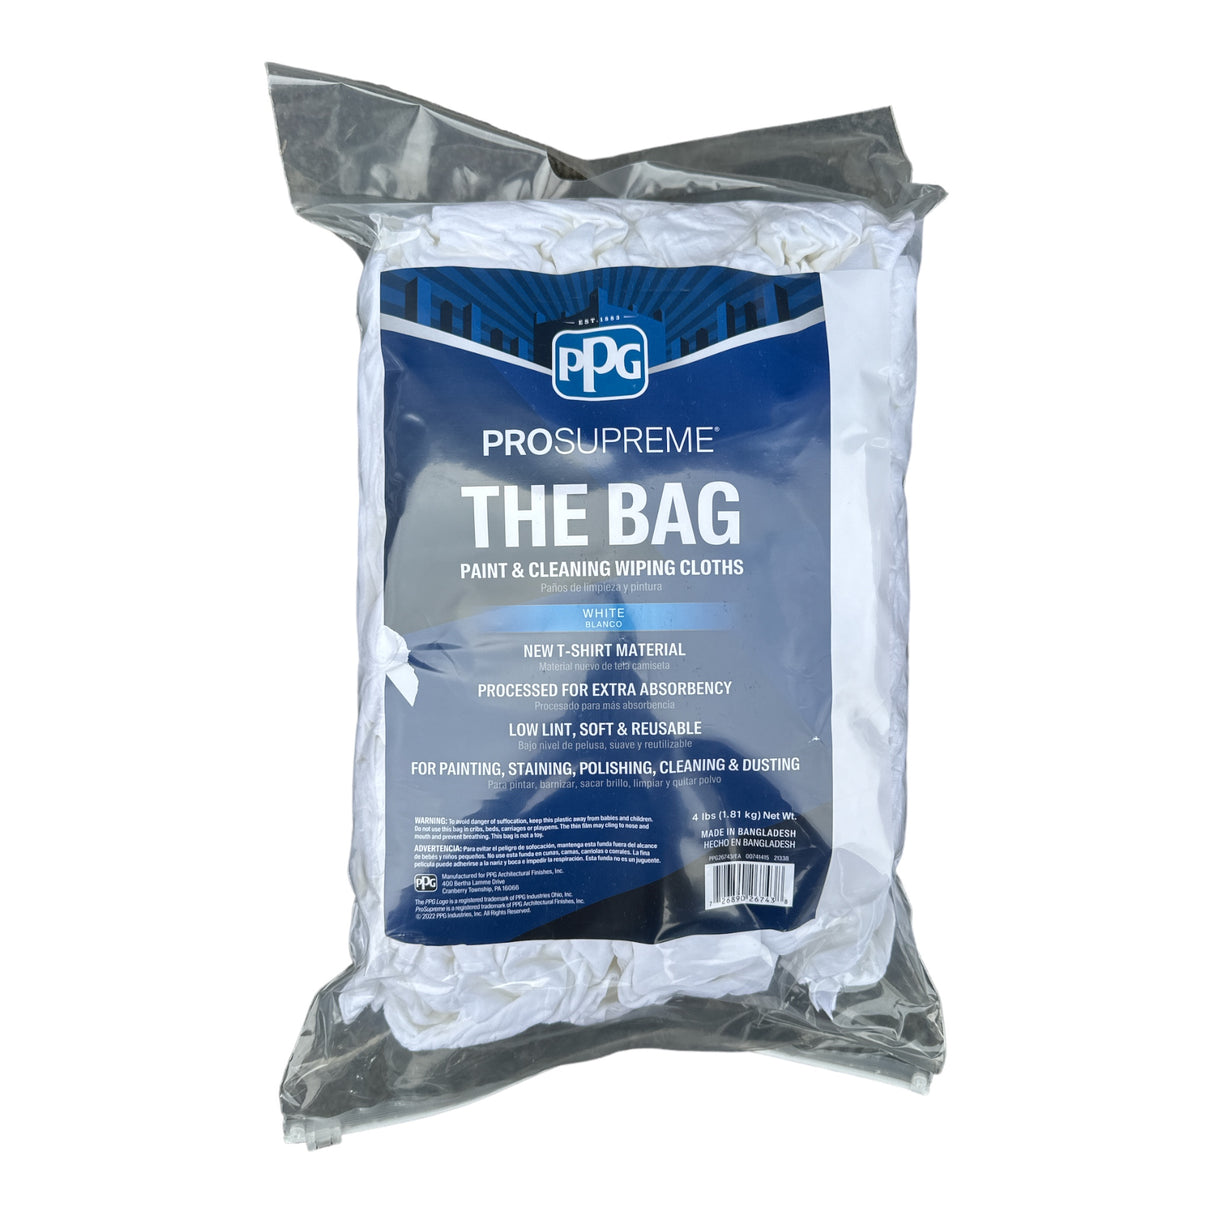 PPG ProSupreme “The Bag” Paint & Cleaning Wiping Cloths